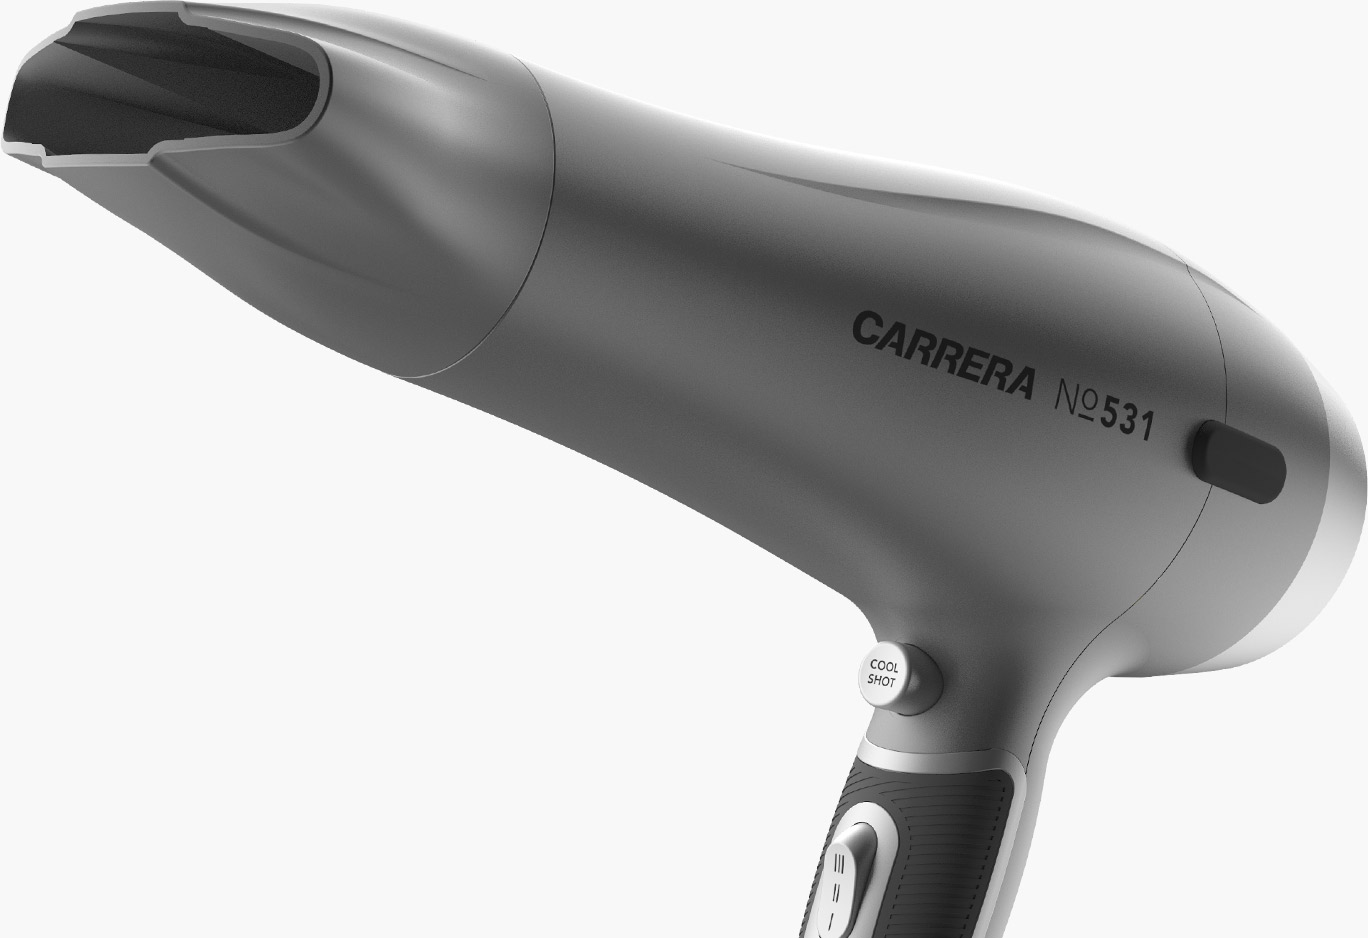 CARRERA №531 Ion Hair Dryer side view of nozzle